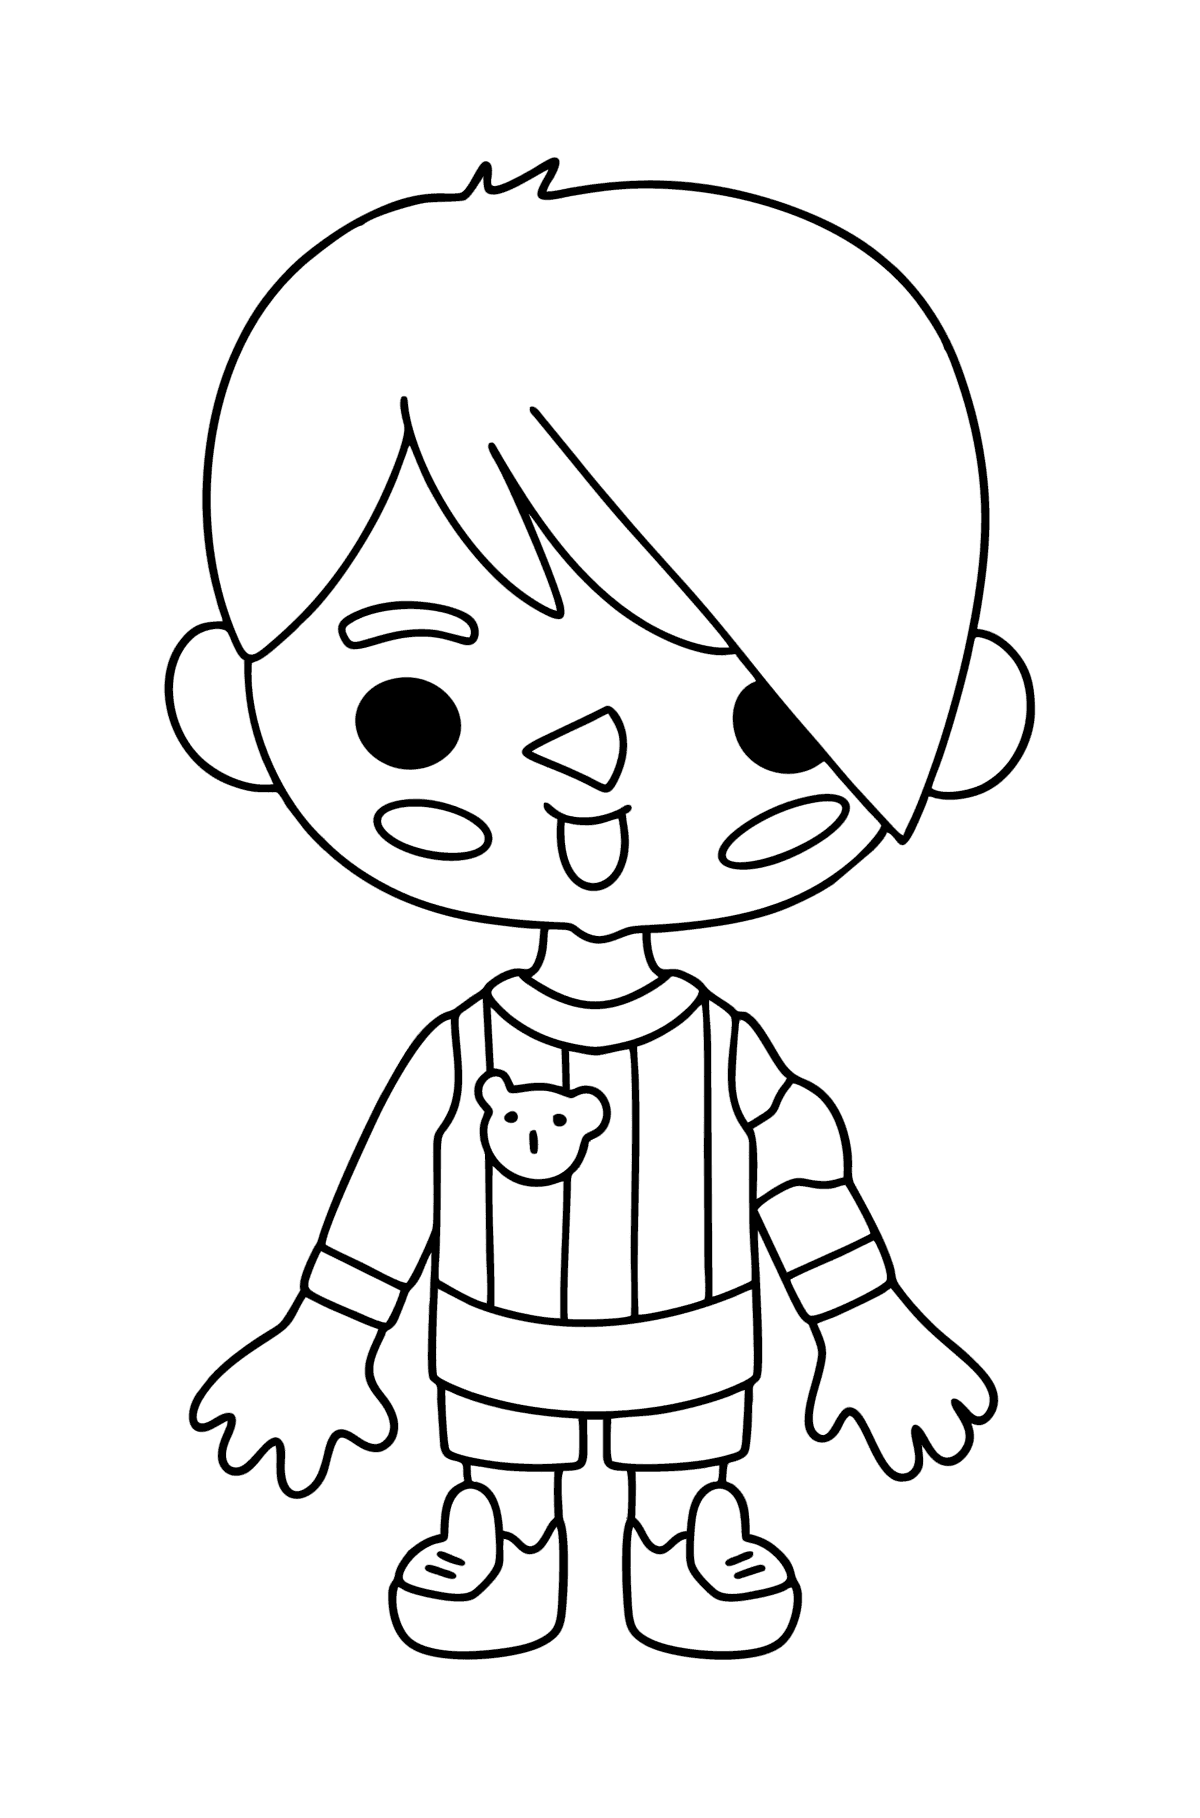 Coloring page Boy tocaboca 05 - Coloring Pages for Kids